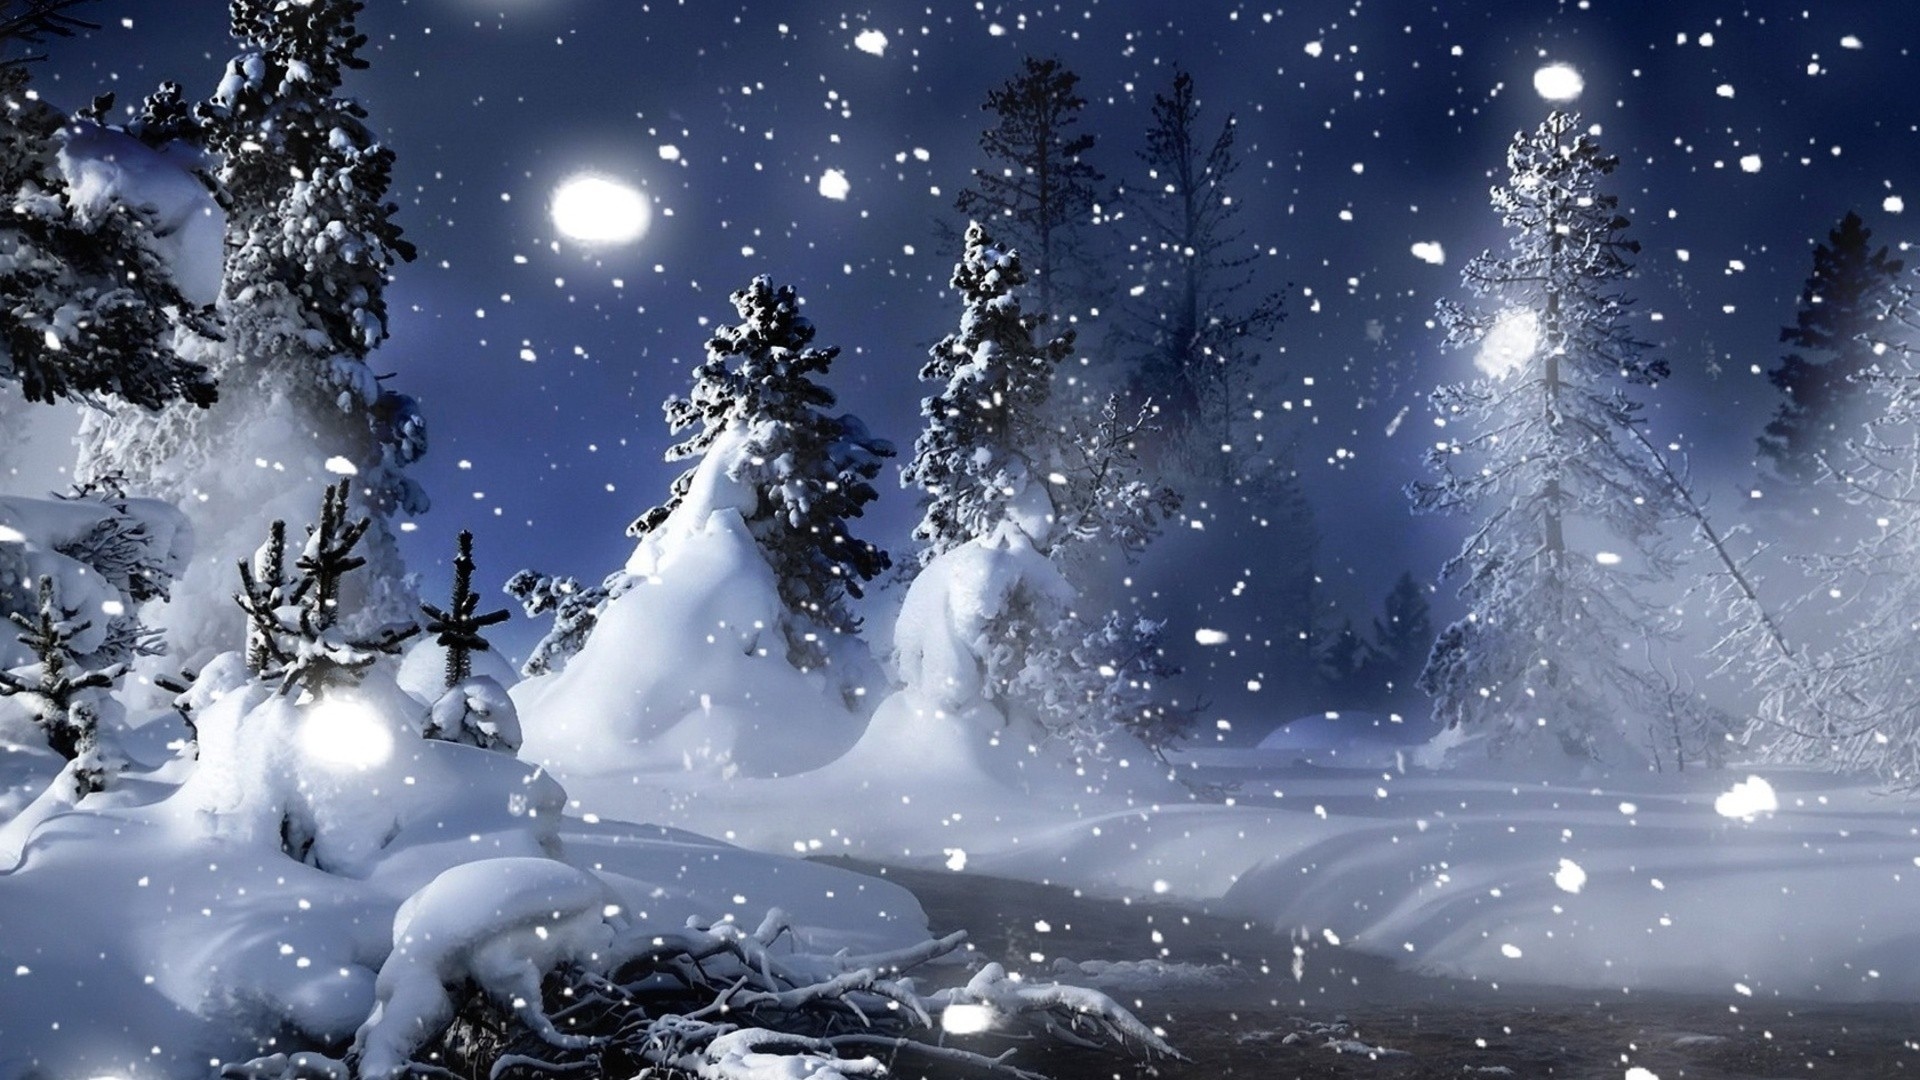 nature, Landscapes, Christmas, Trees, Forest, Snowing, Snowflakes, Winter, Snow, Seasons